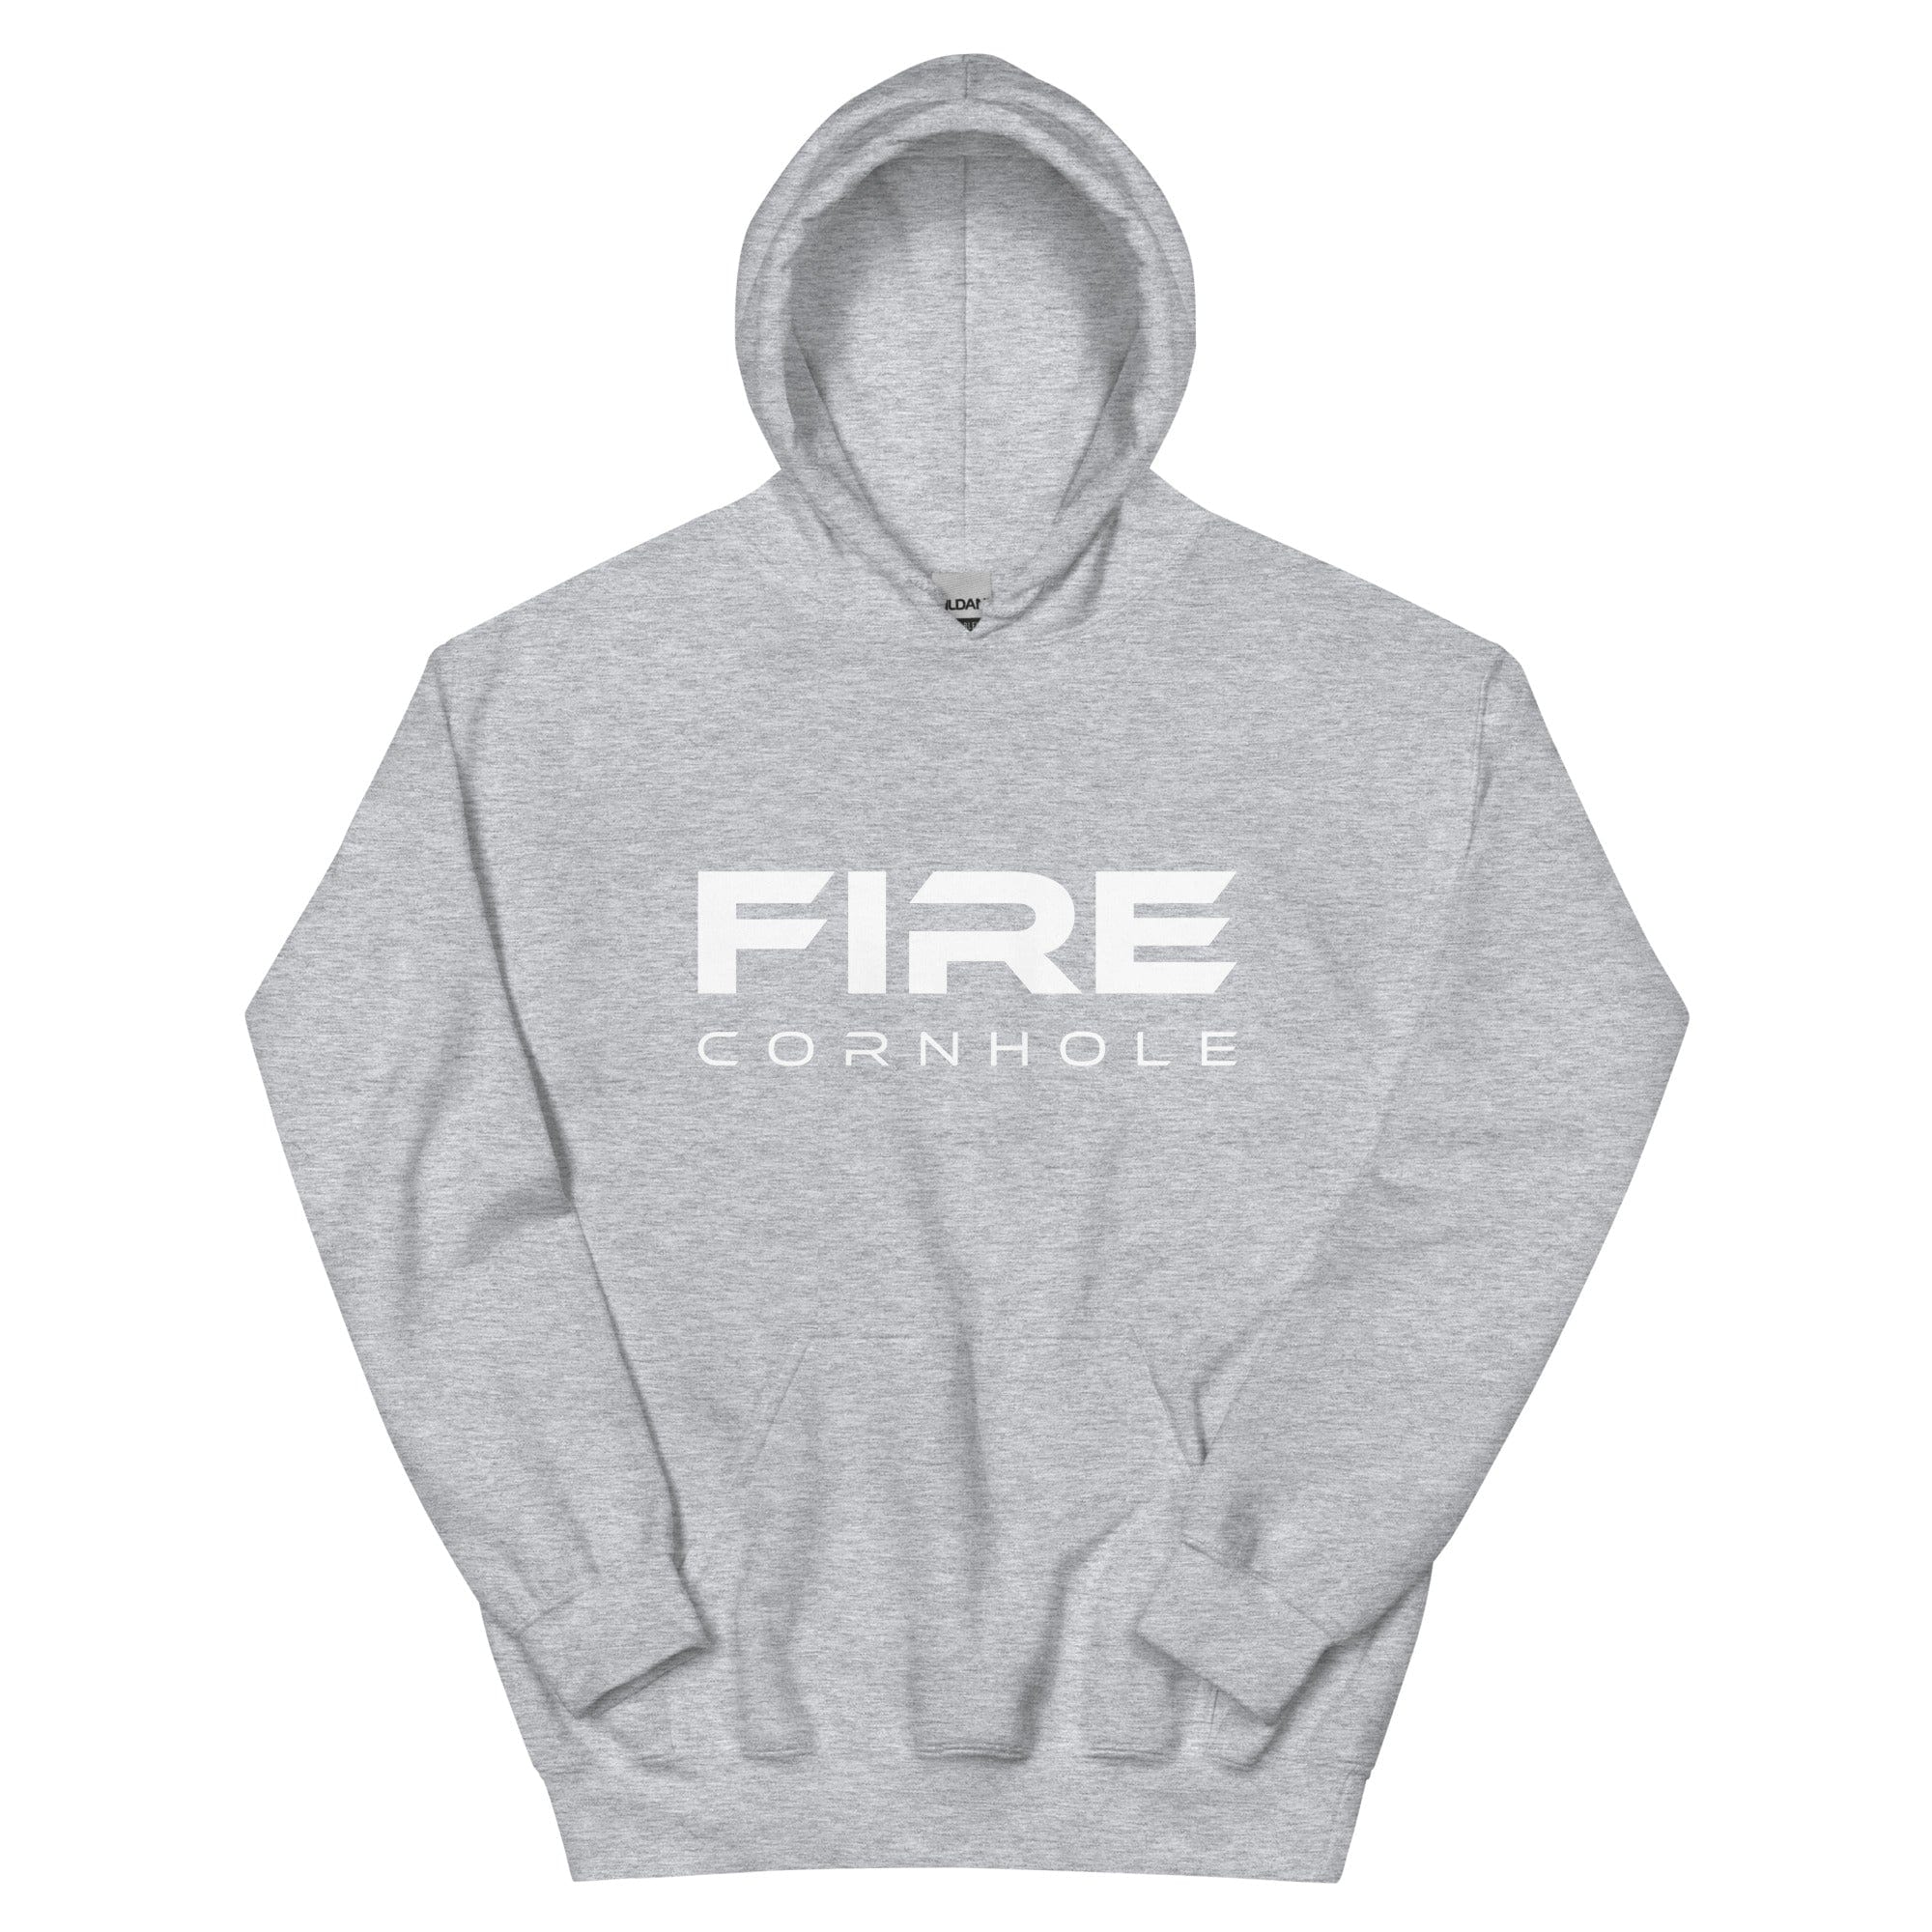 Heathered grey unisex cotton hoodie with Fire Cornhole logo in white